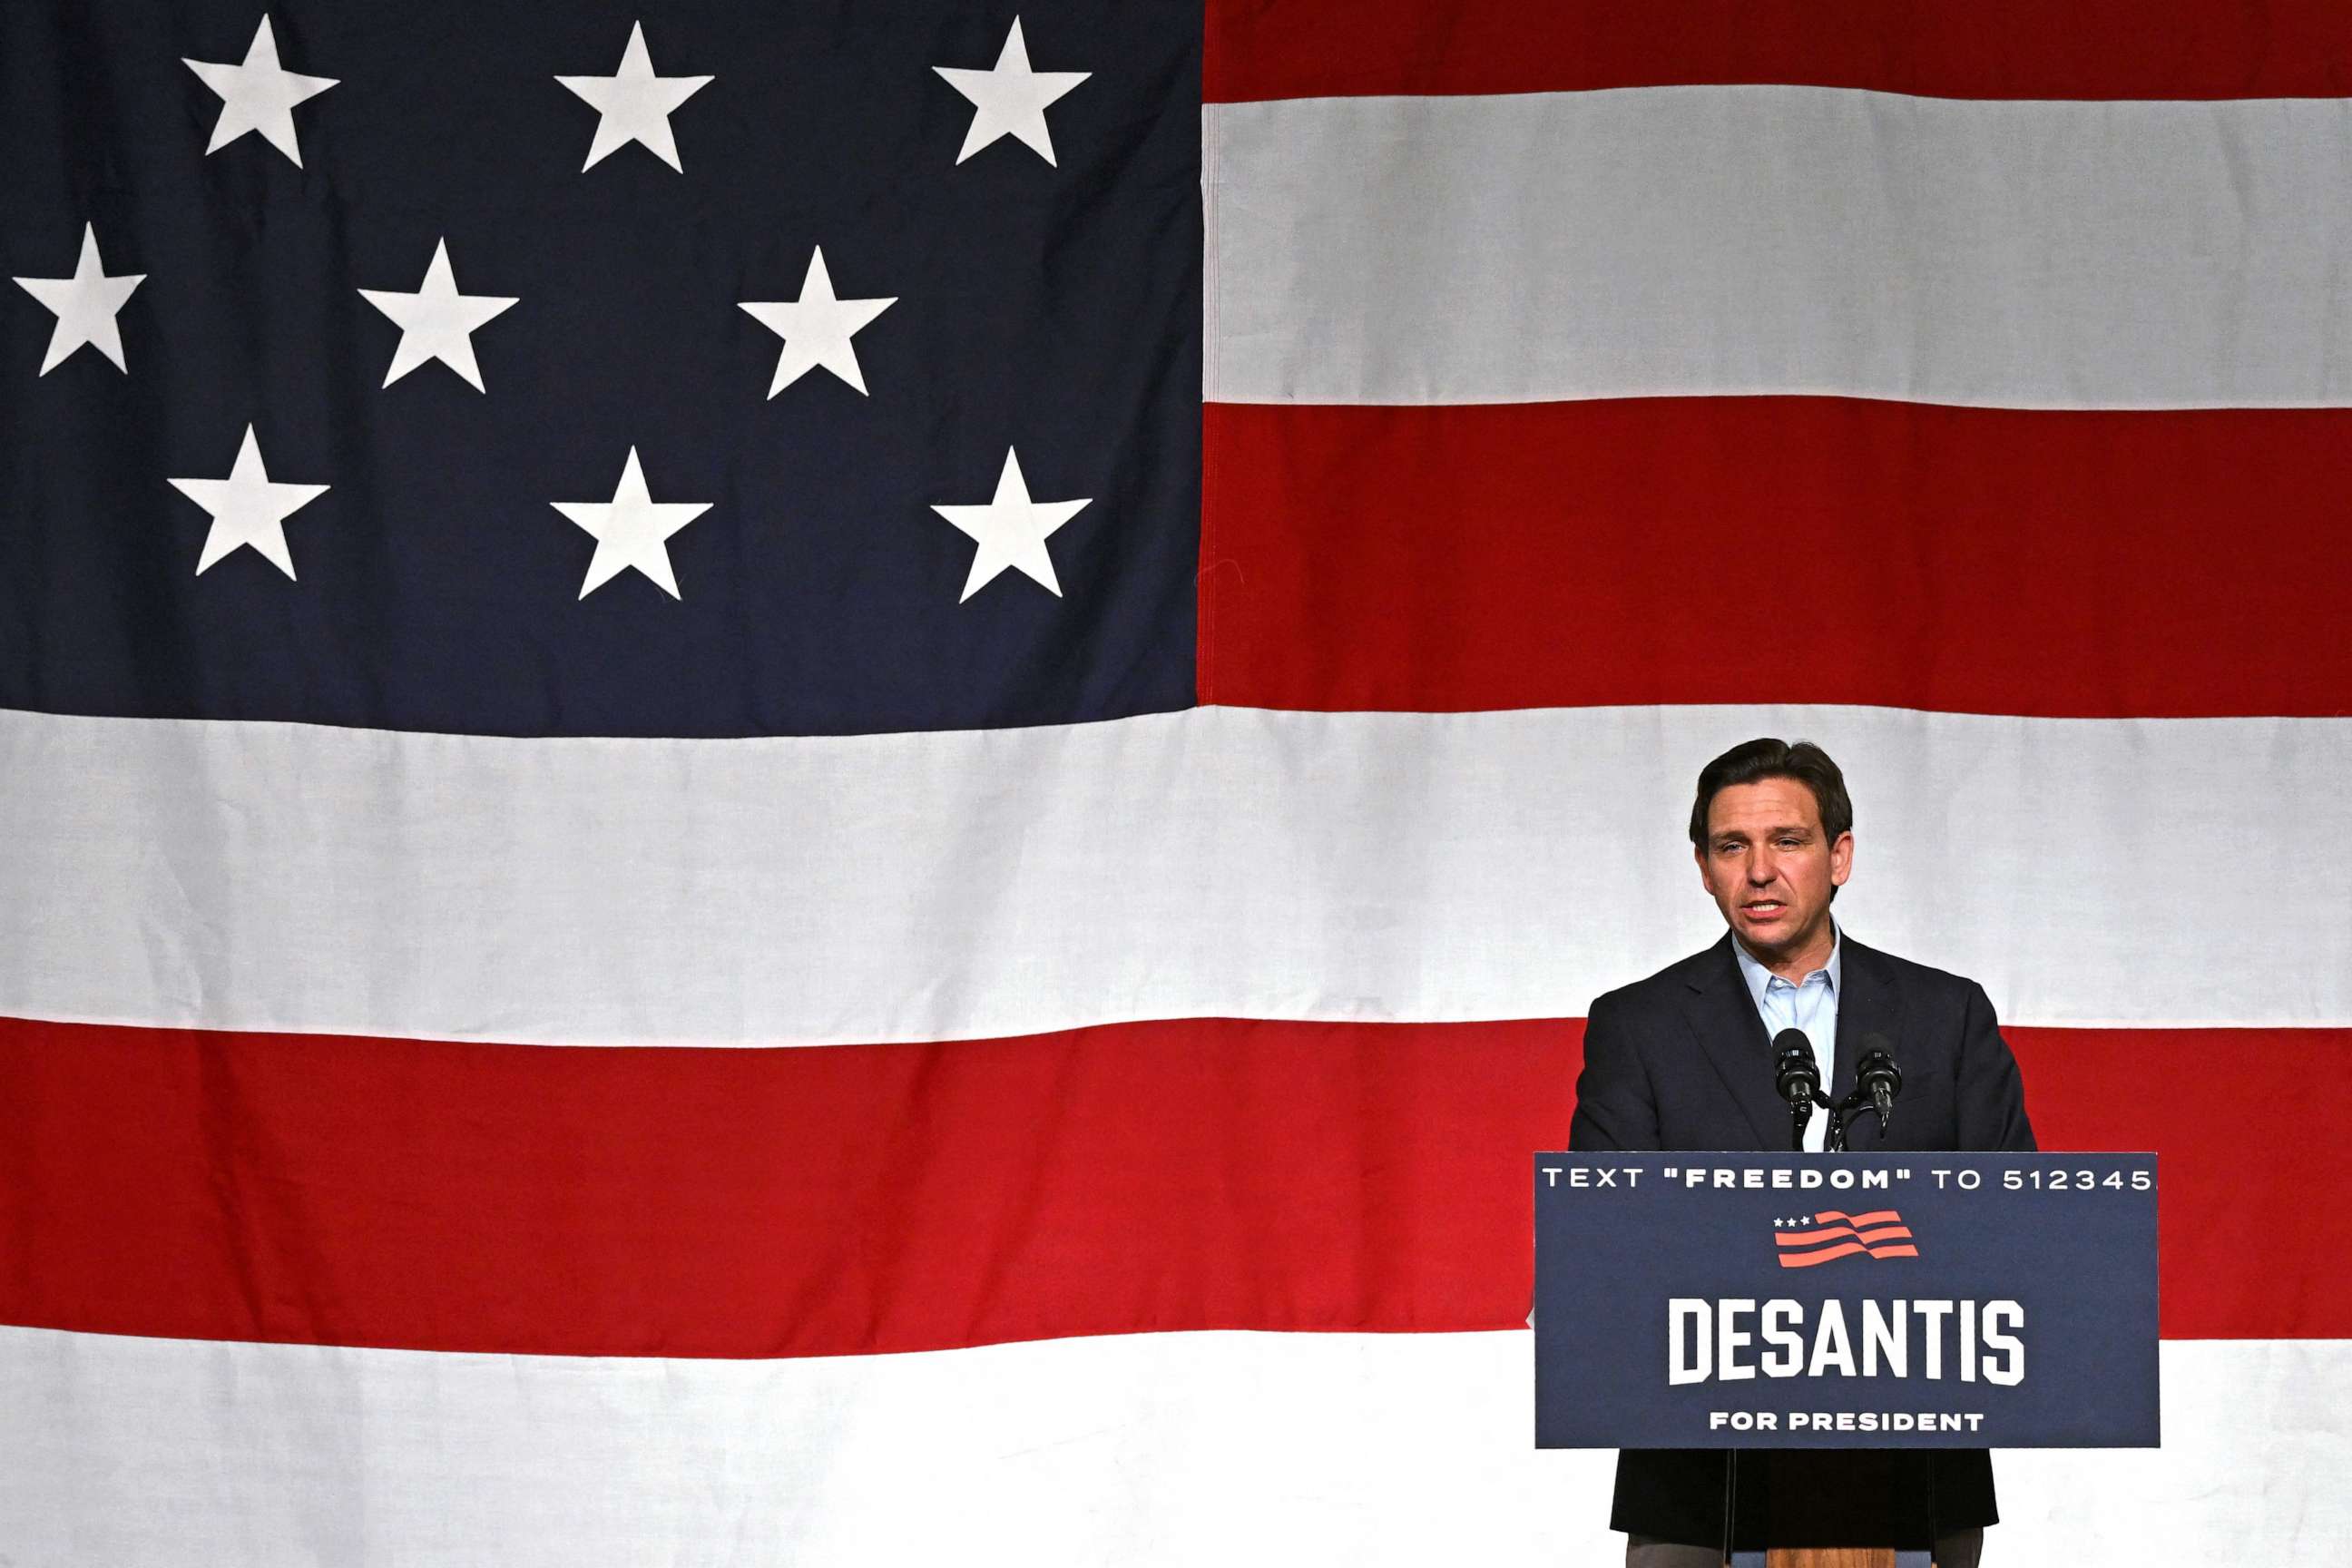 PHOTO: Florida Governor and 2024 Presidential hopeful Ron DeSantis speaks during his campaign kickoff event at Eternity Church in Clive, Iowa, on May 30, 2023.